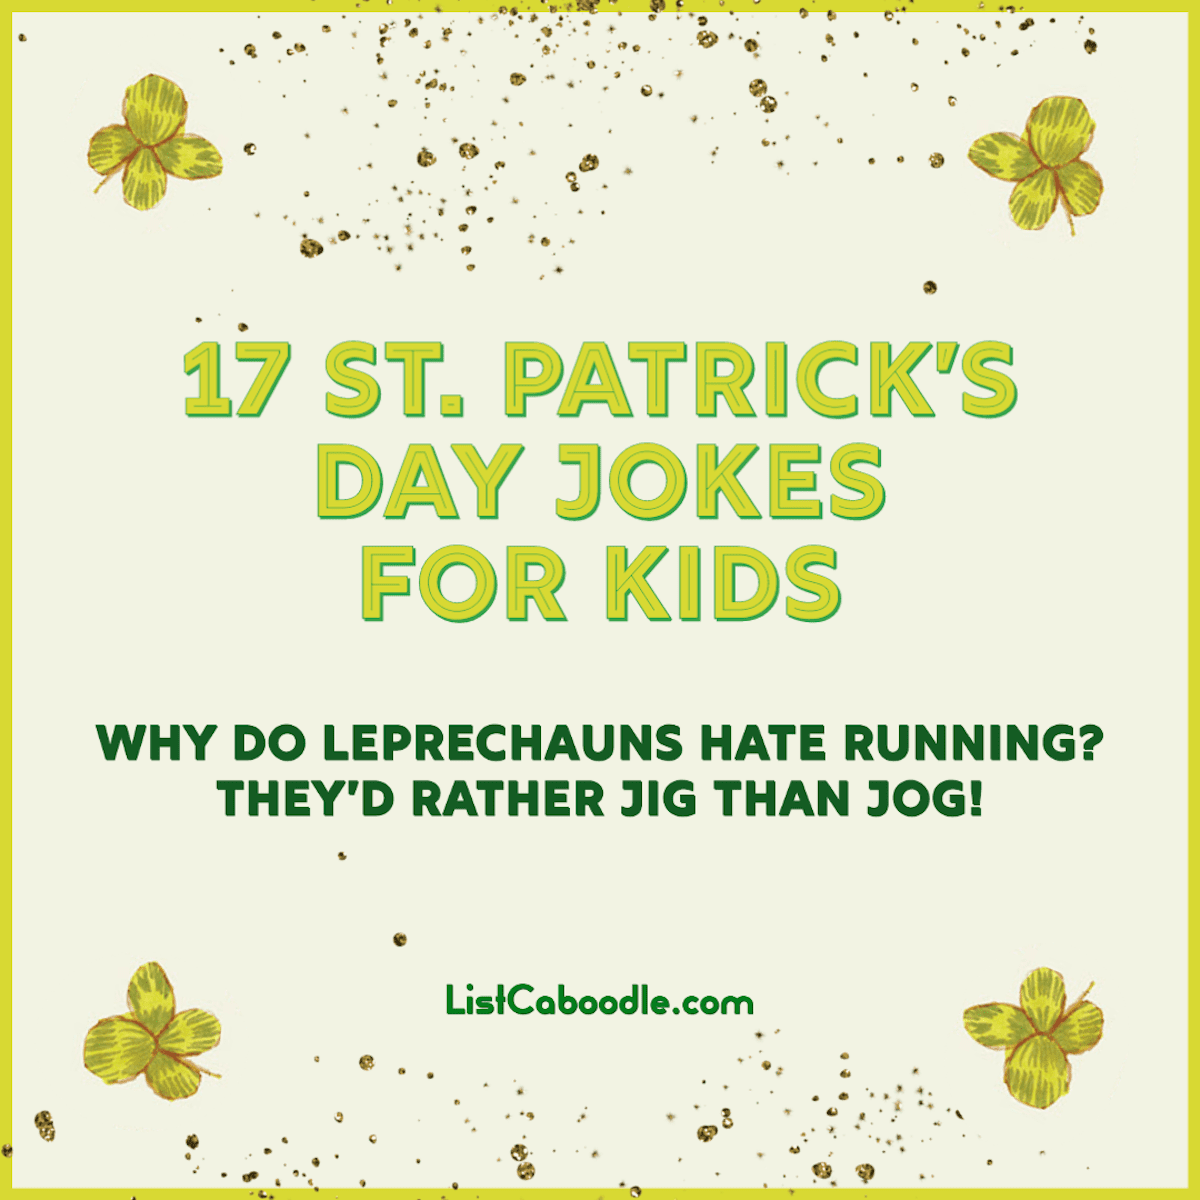 17 St. Patrick's Day Jokes For Kids (For A Wee Bit of Humor)